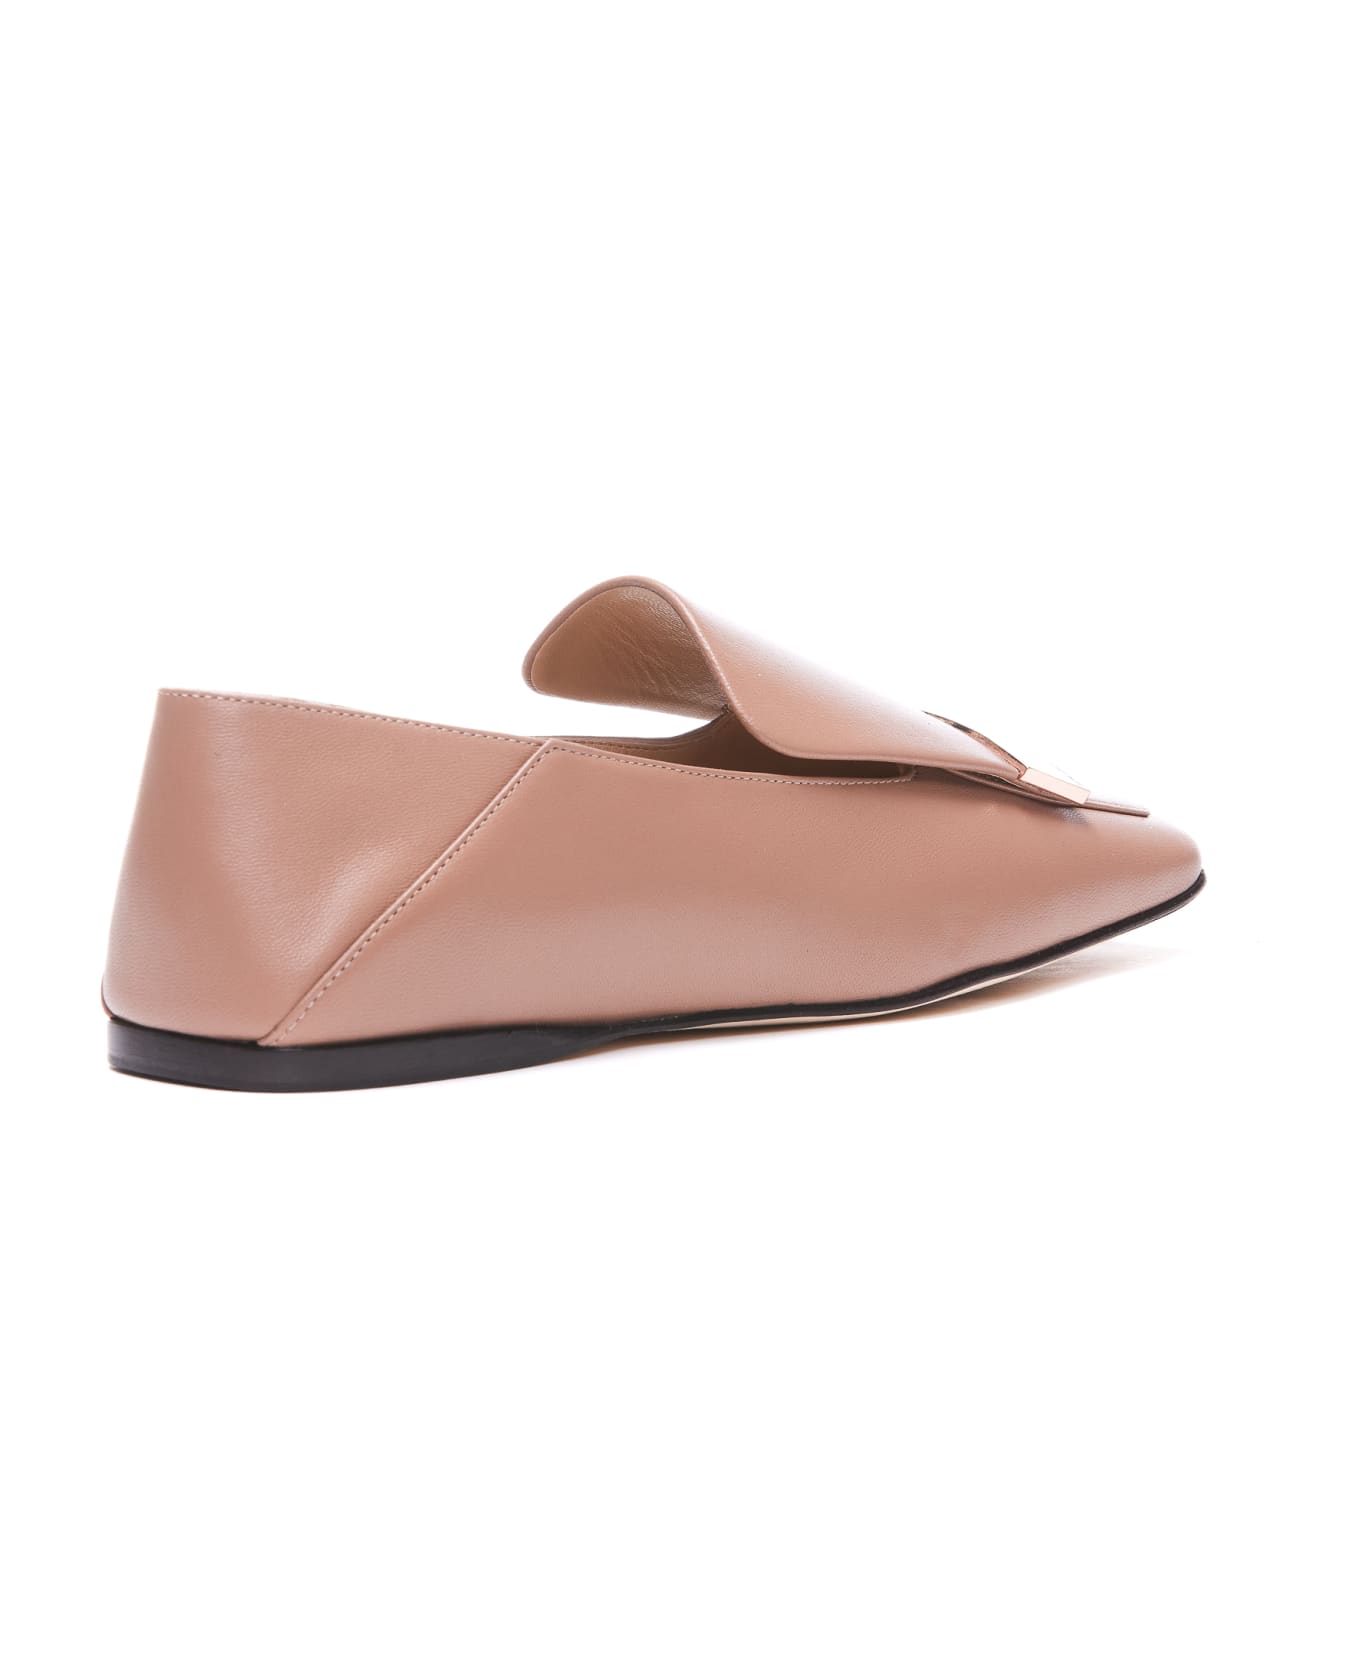 Sergio Rossi Flat Loafers - Nude